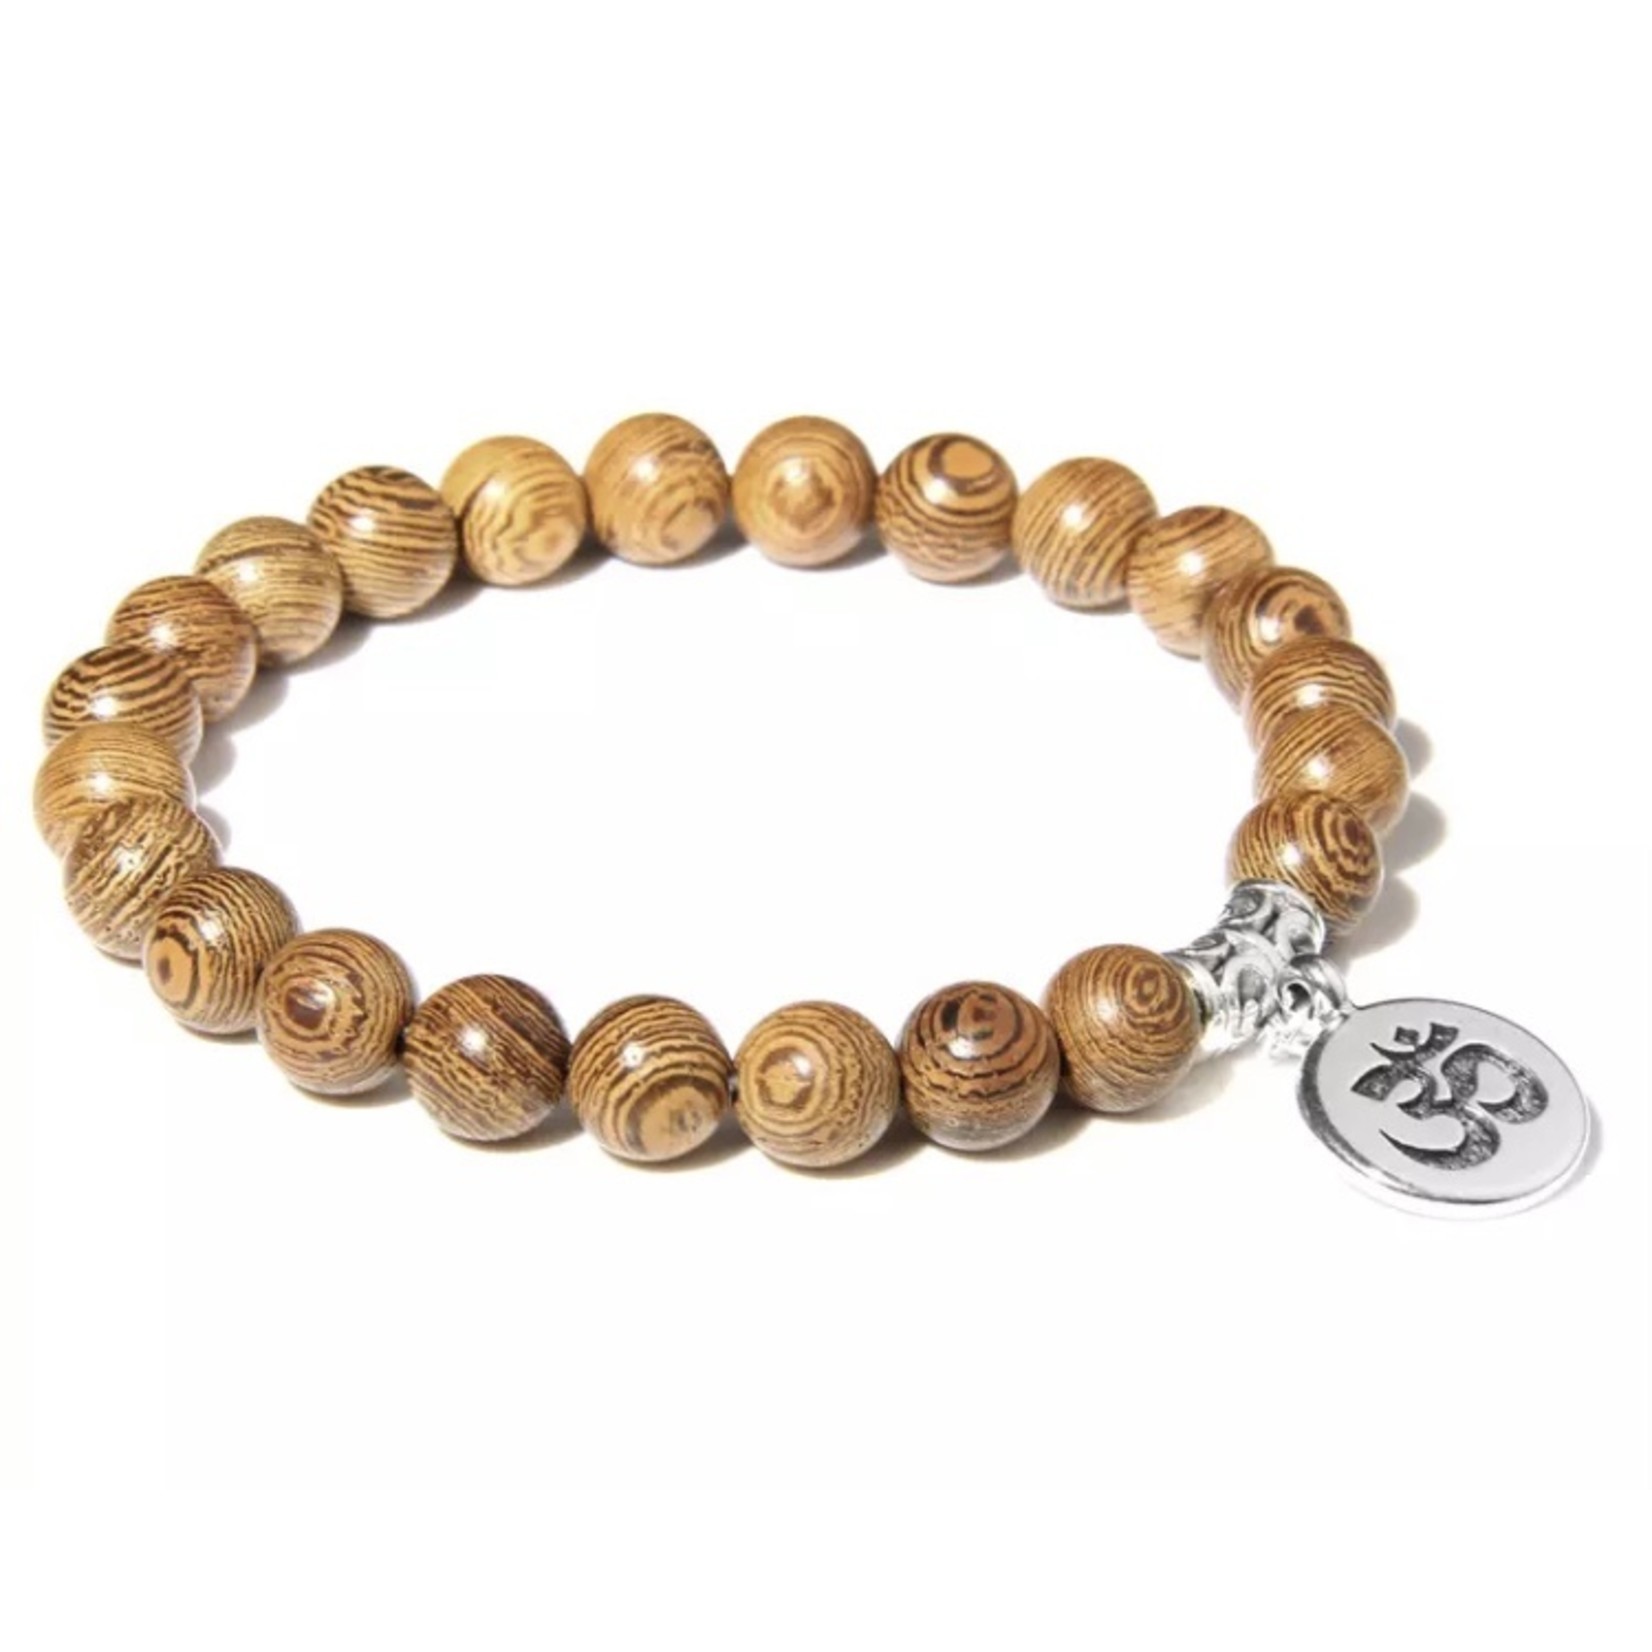 Natural Stone and Wood Bracelets 21cm - Simple and Natural Elegance